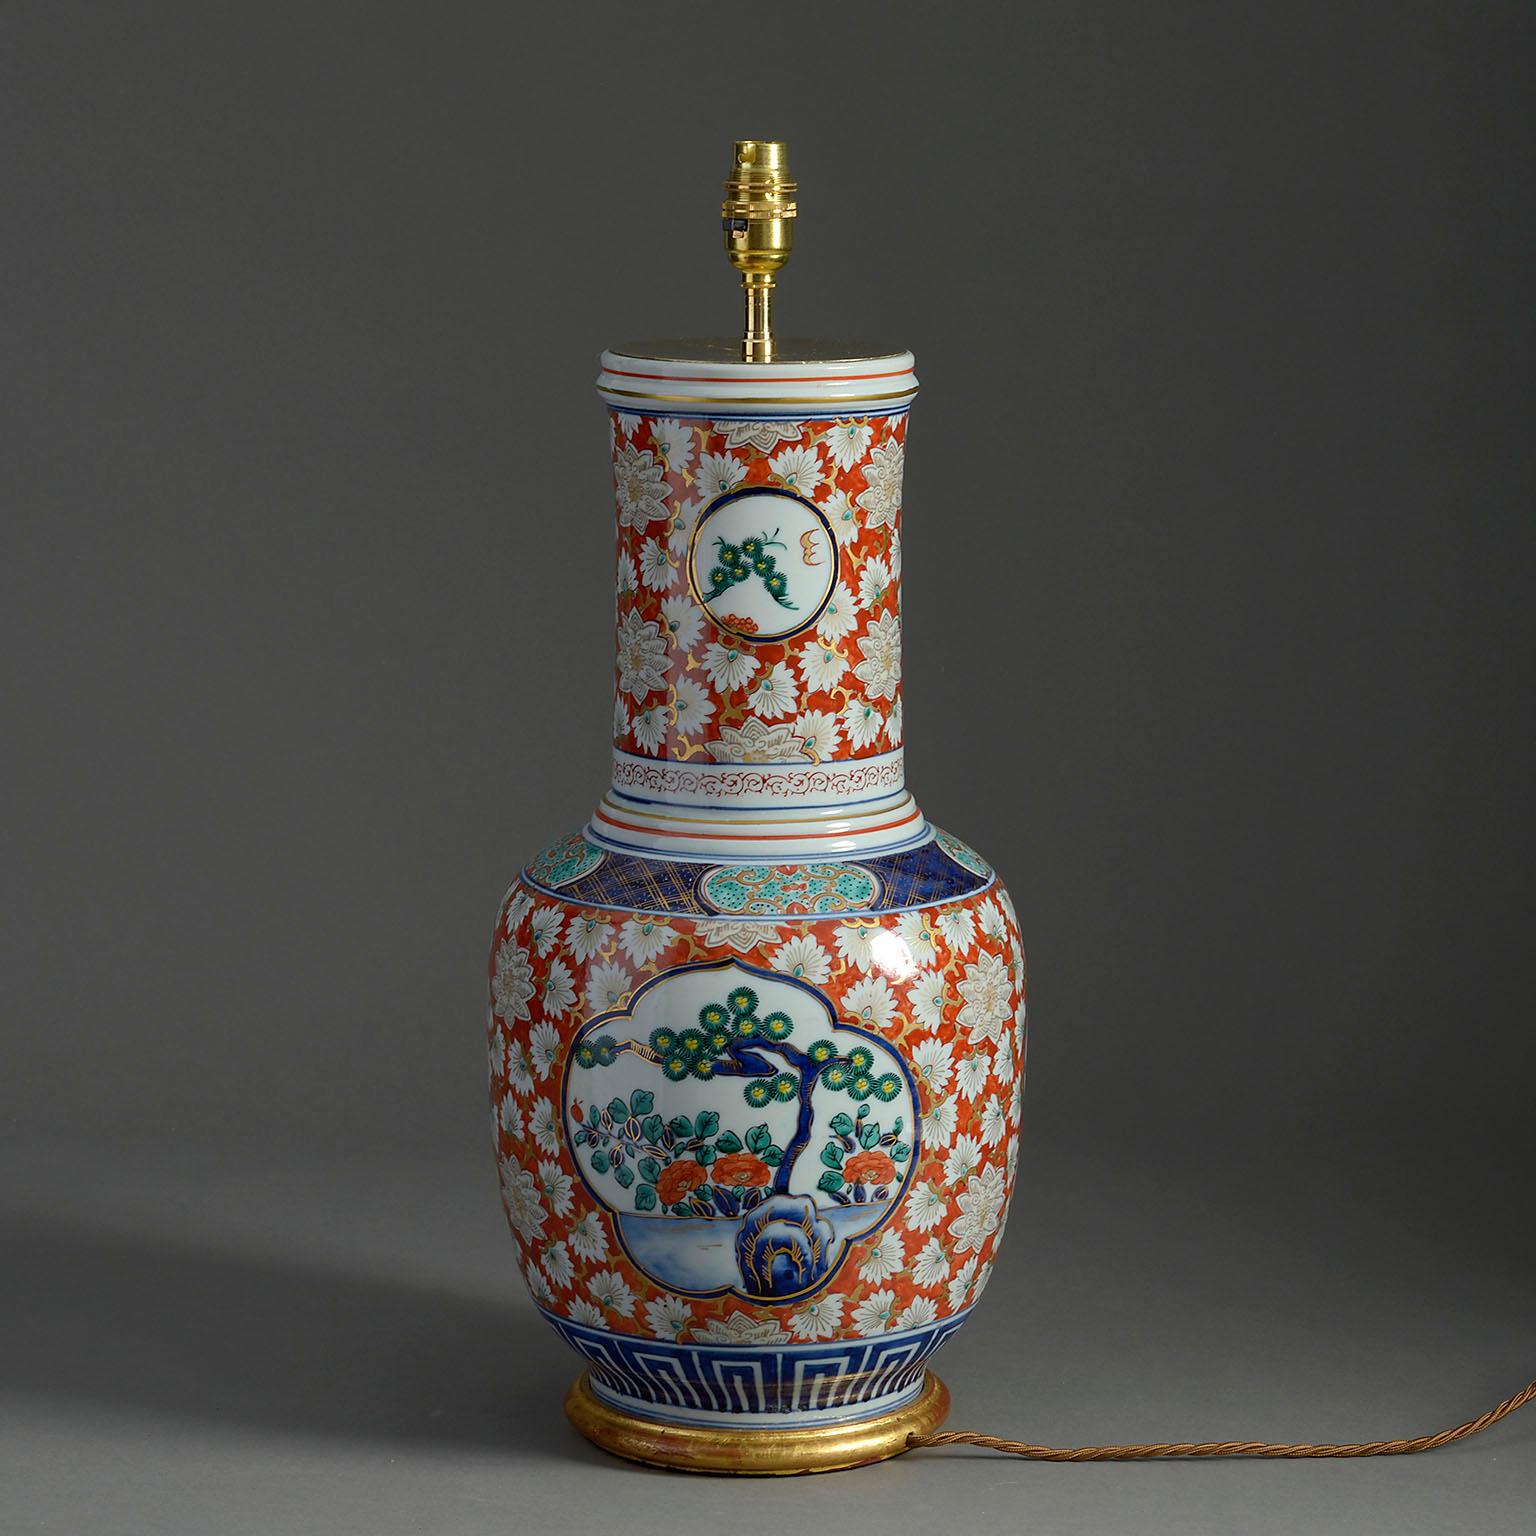 A tall late nineteenth century Imari porcelain vase of gourd form, decorated in the traditional manner with glowers and foliage on a red ground, with cartouches throughout depicting spring blossoms. Mounted as a table lamp on a hand turned giltwood